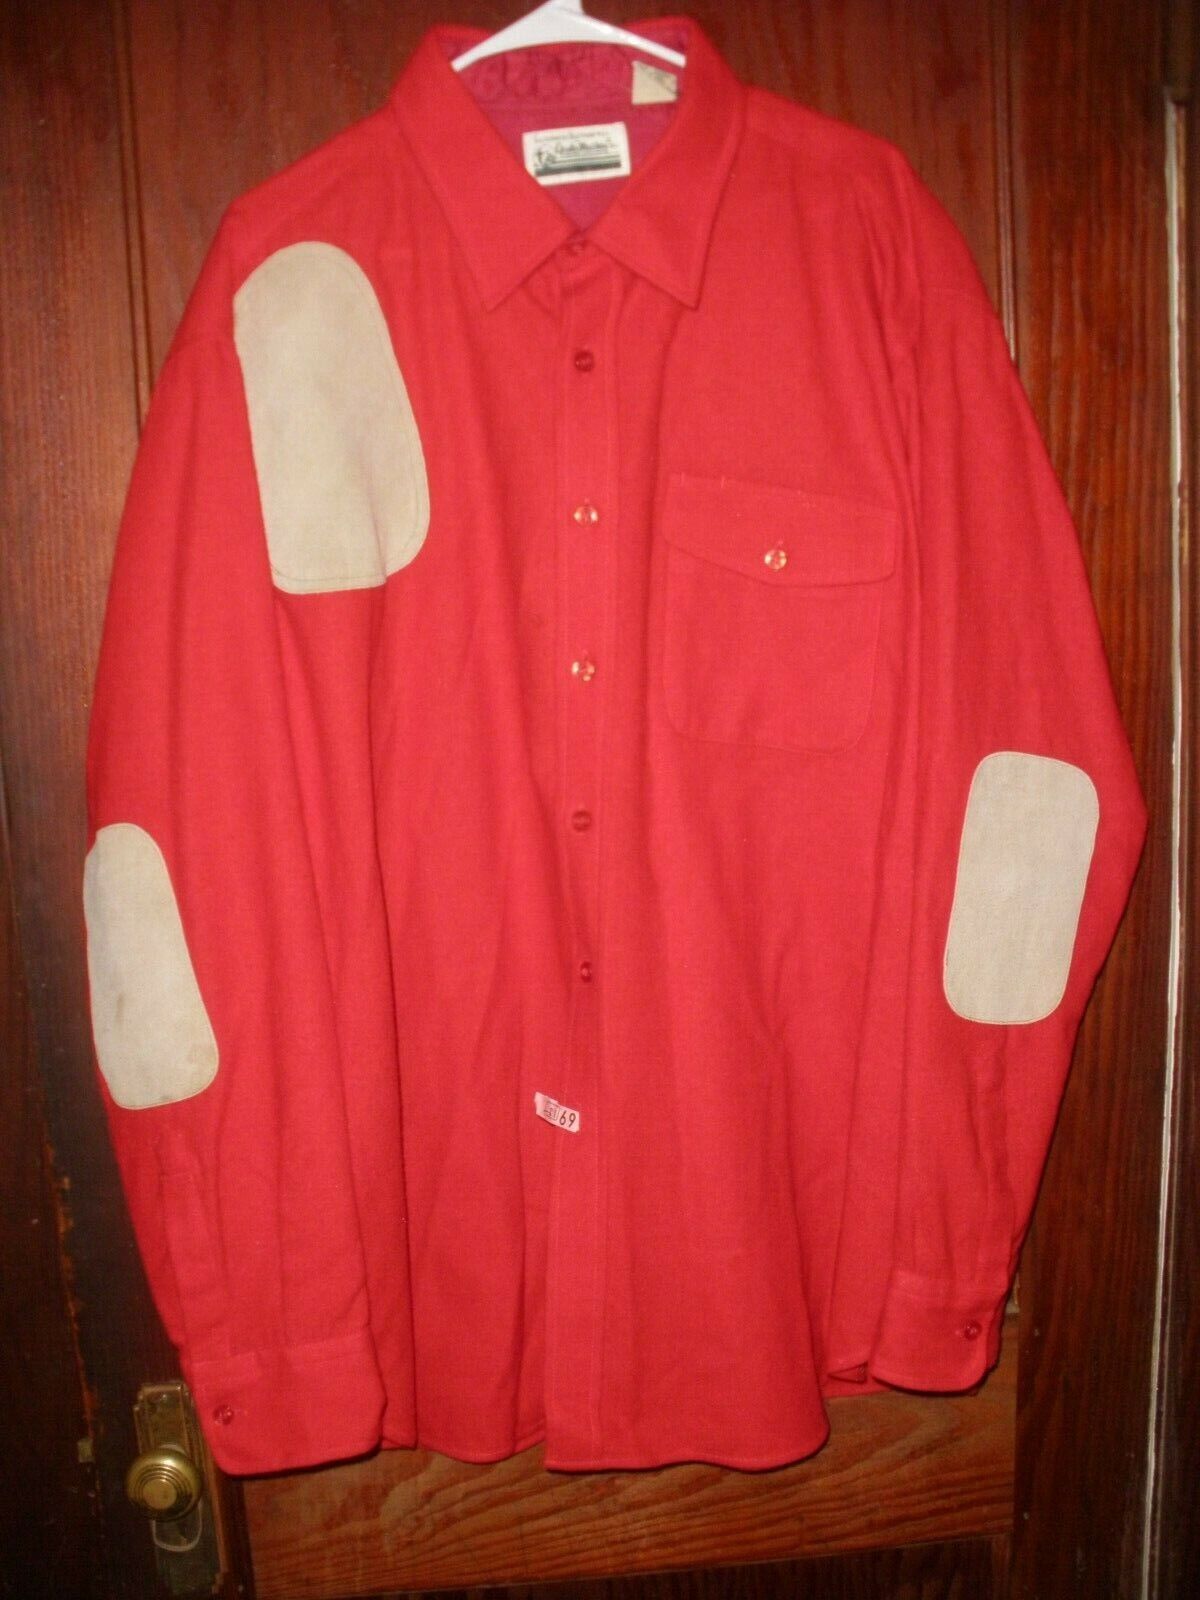 Vintage Mens Gander Mountain Red Shooting Shirt with Suede Patches 3XL Tall